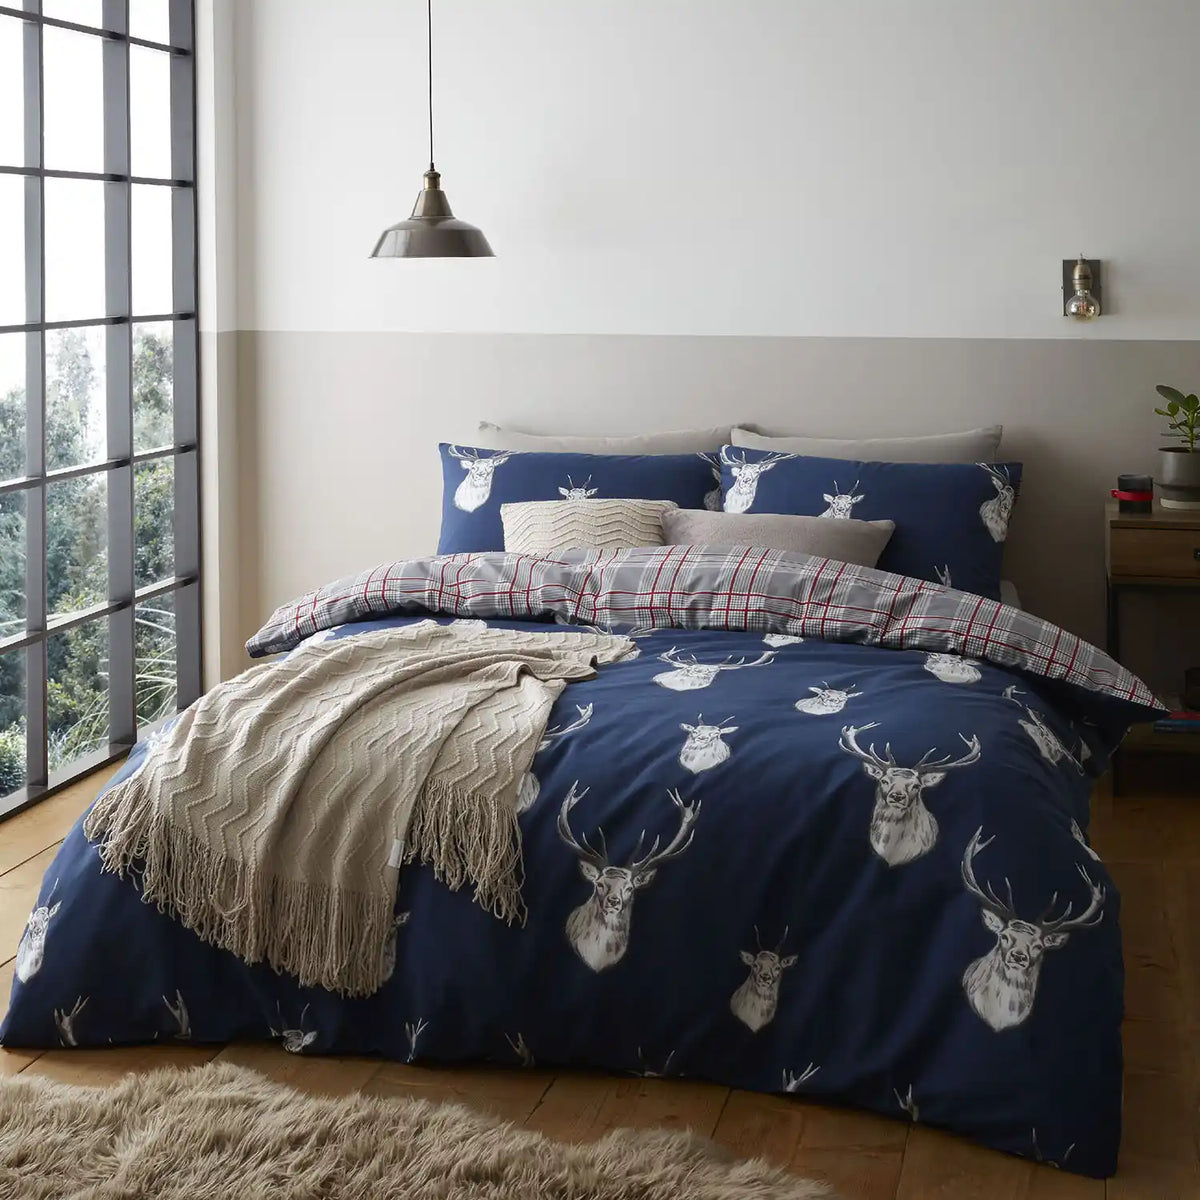 Stag Check Duvet Cover Set With Pillowcases - Navy